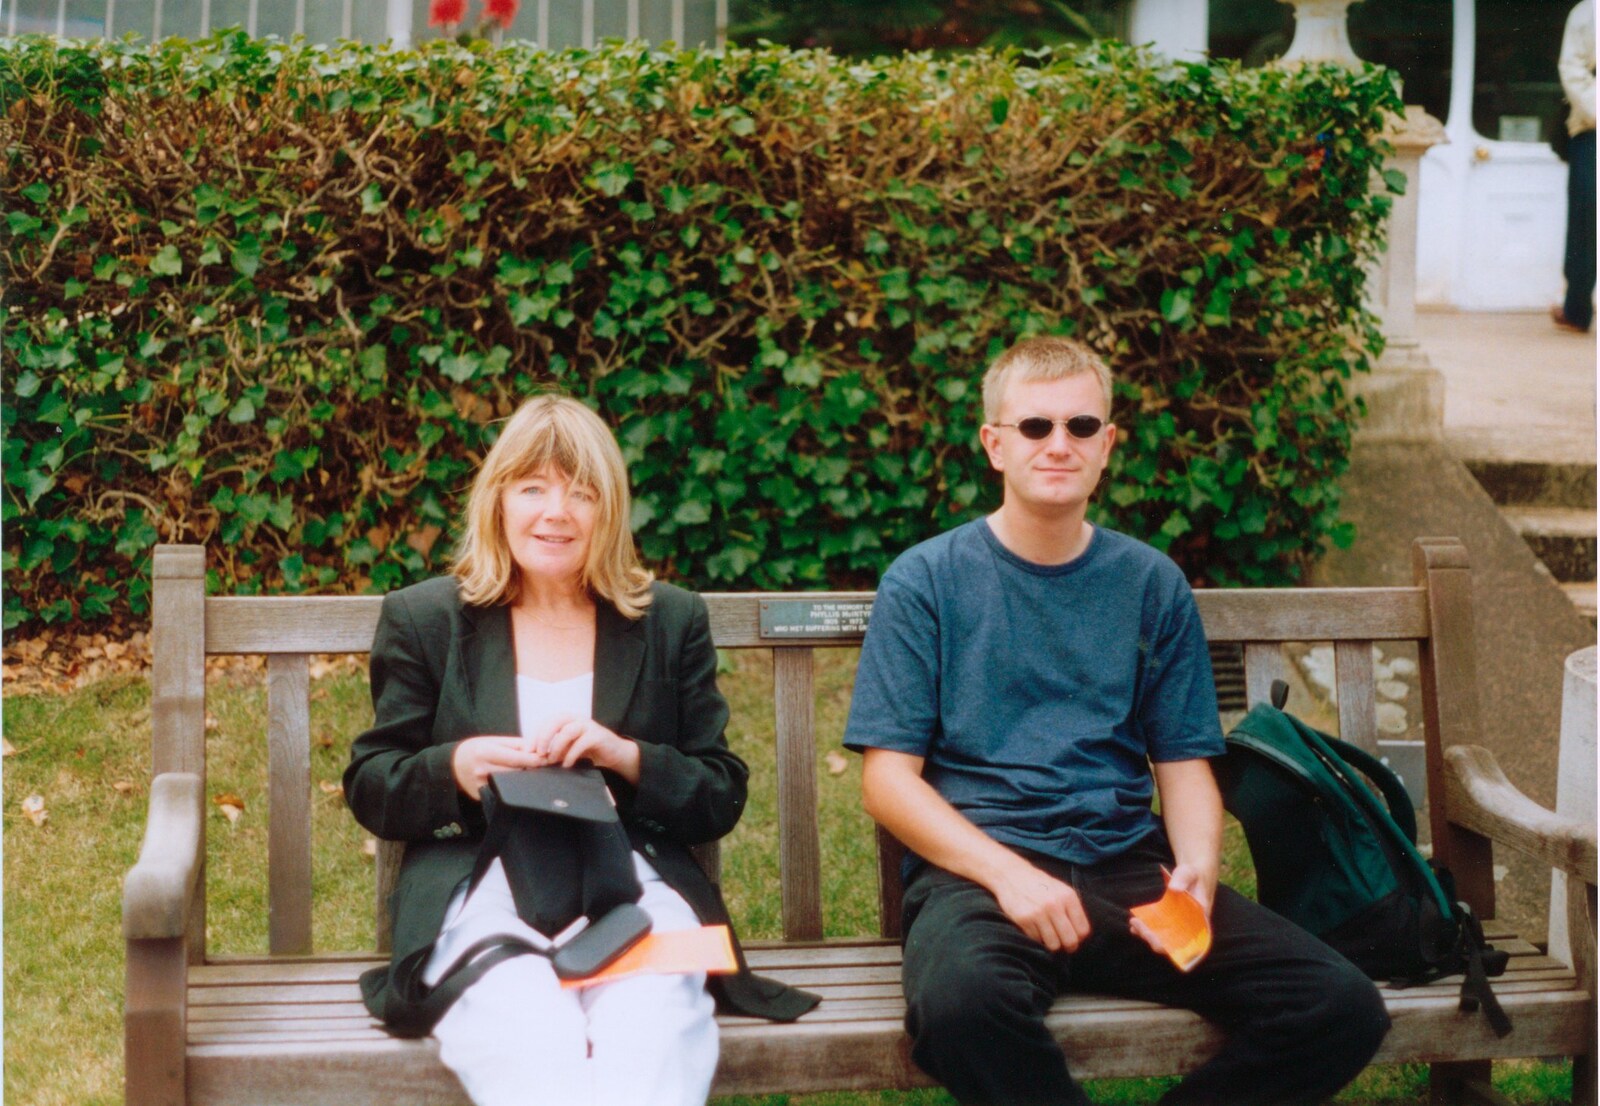 An orphaned photo at Kew Gardens in 1999 of Nosher and Mother from Mike's Memorial, Prince Hall Hotel, Two Bridges, Dartmoor - 12th July 2011